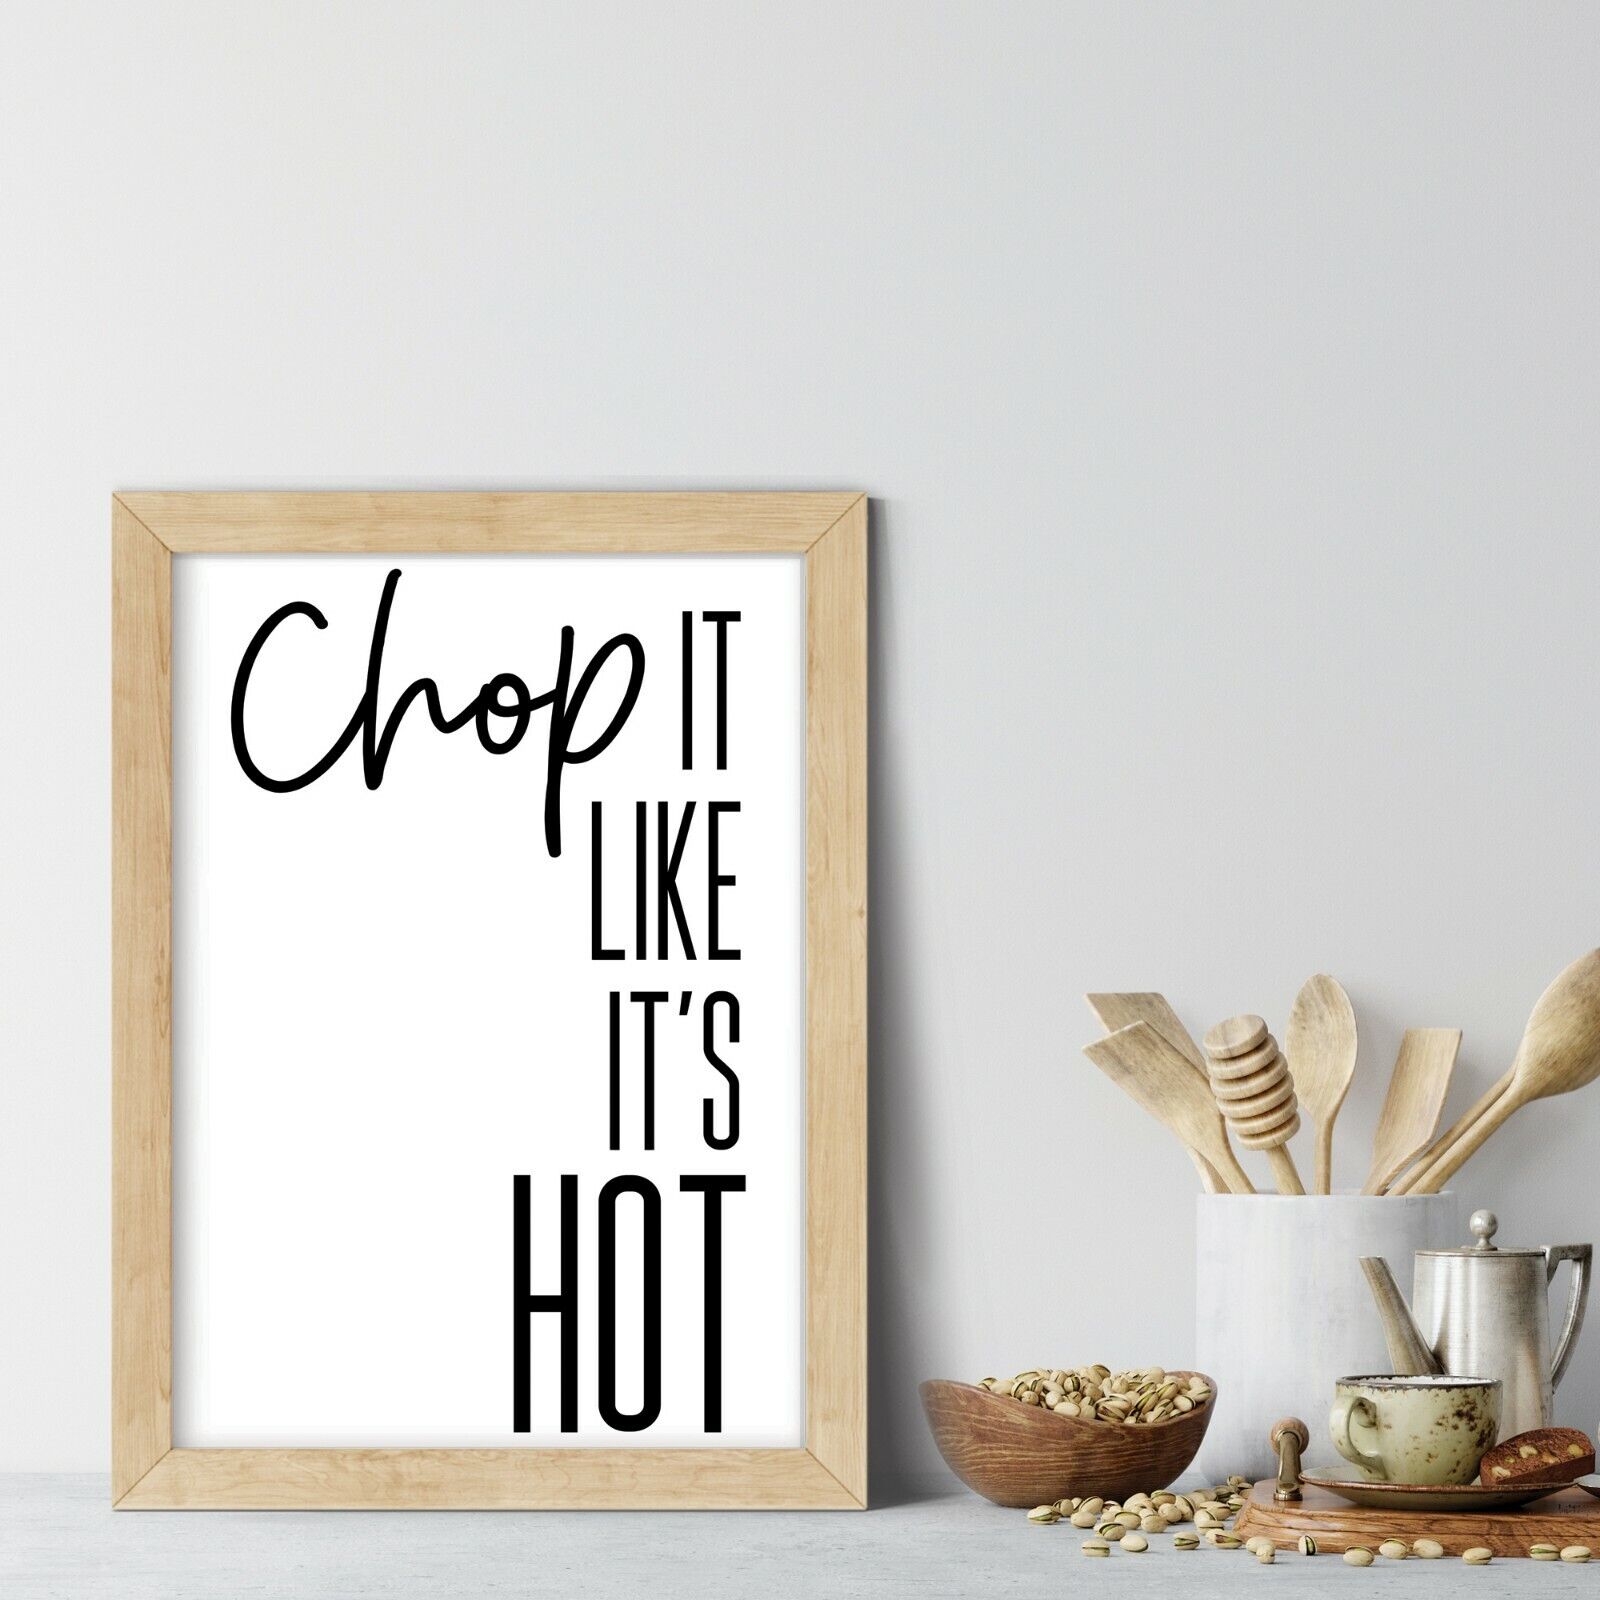 Kitchen Prints Wall Art Picture Funny Quote Minimalist Print Home Posters  Chop 34966291806 | eBay